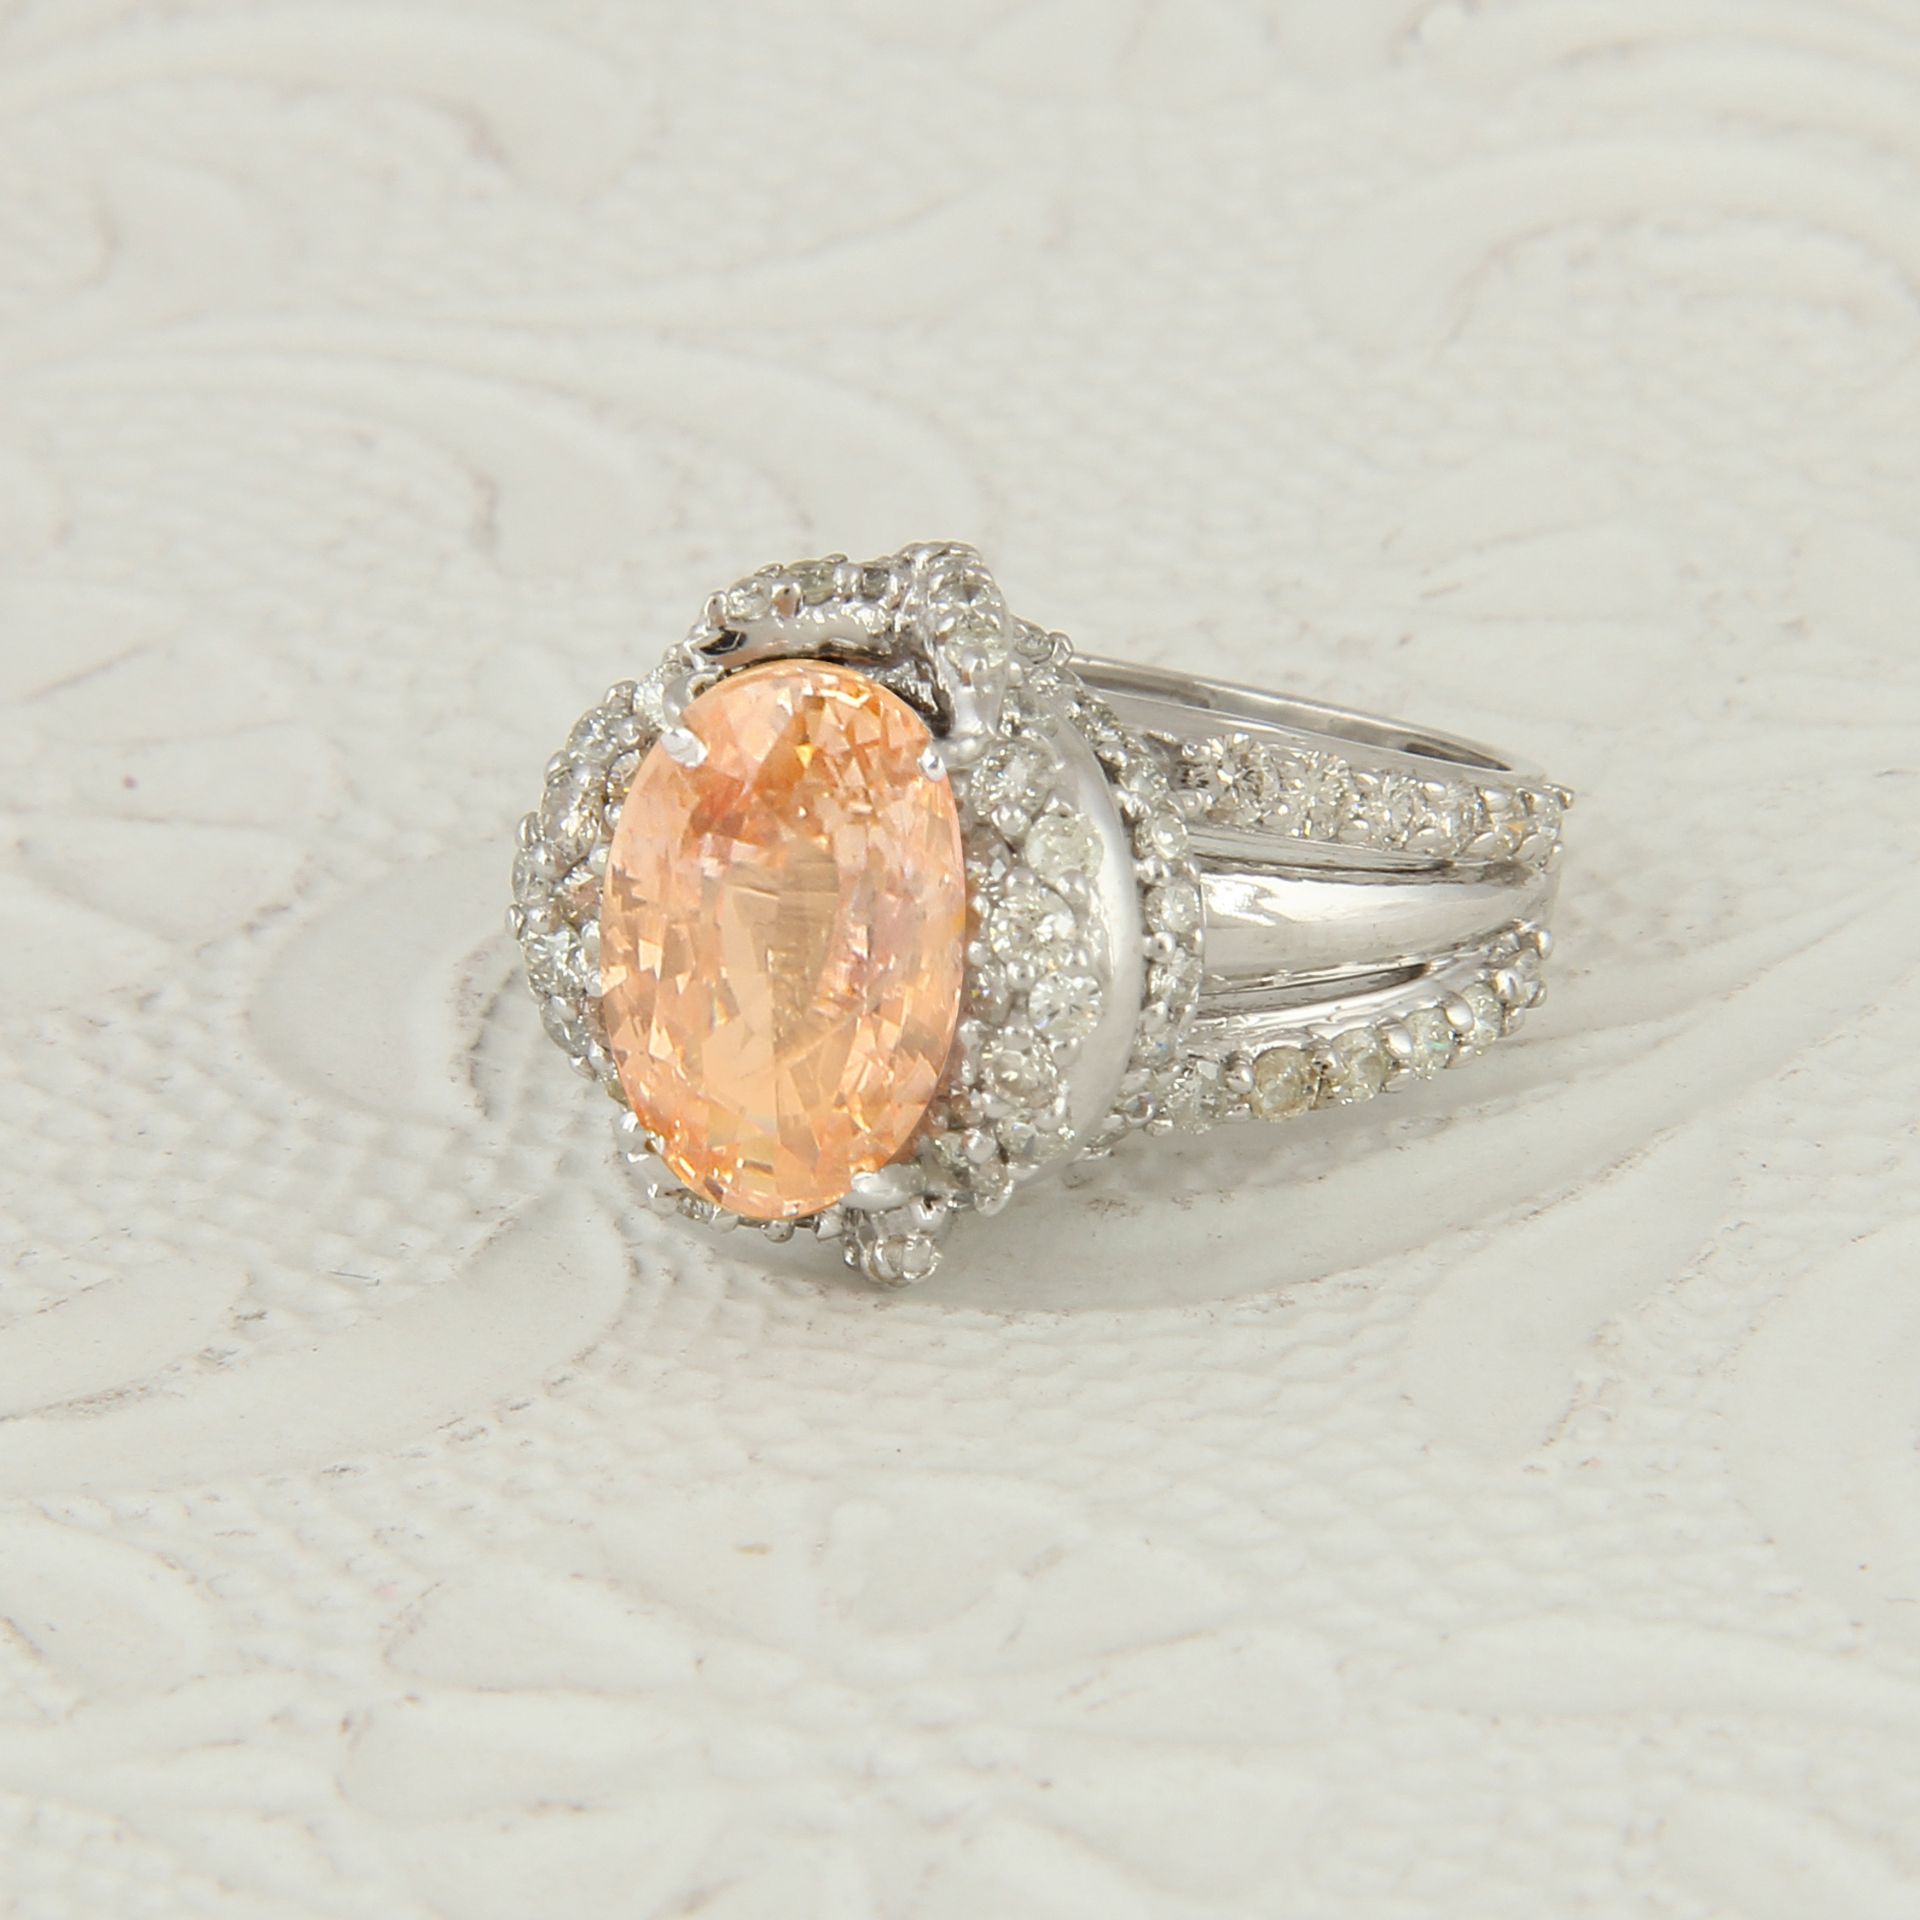 14 K Very Exclusive Designer White Gold Padparadscha Sapphire (GRS certified) and Diamond Ring - Image 3 of 11